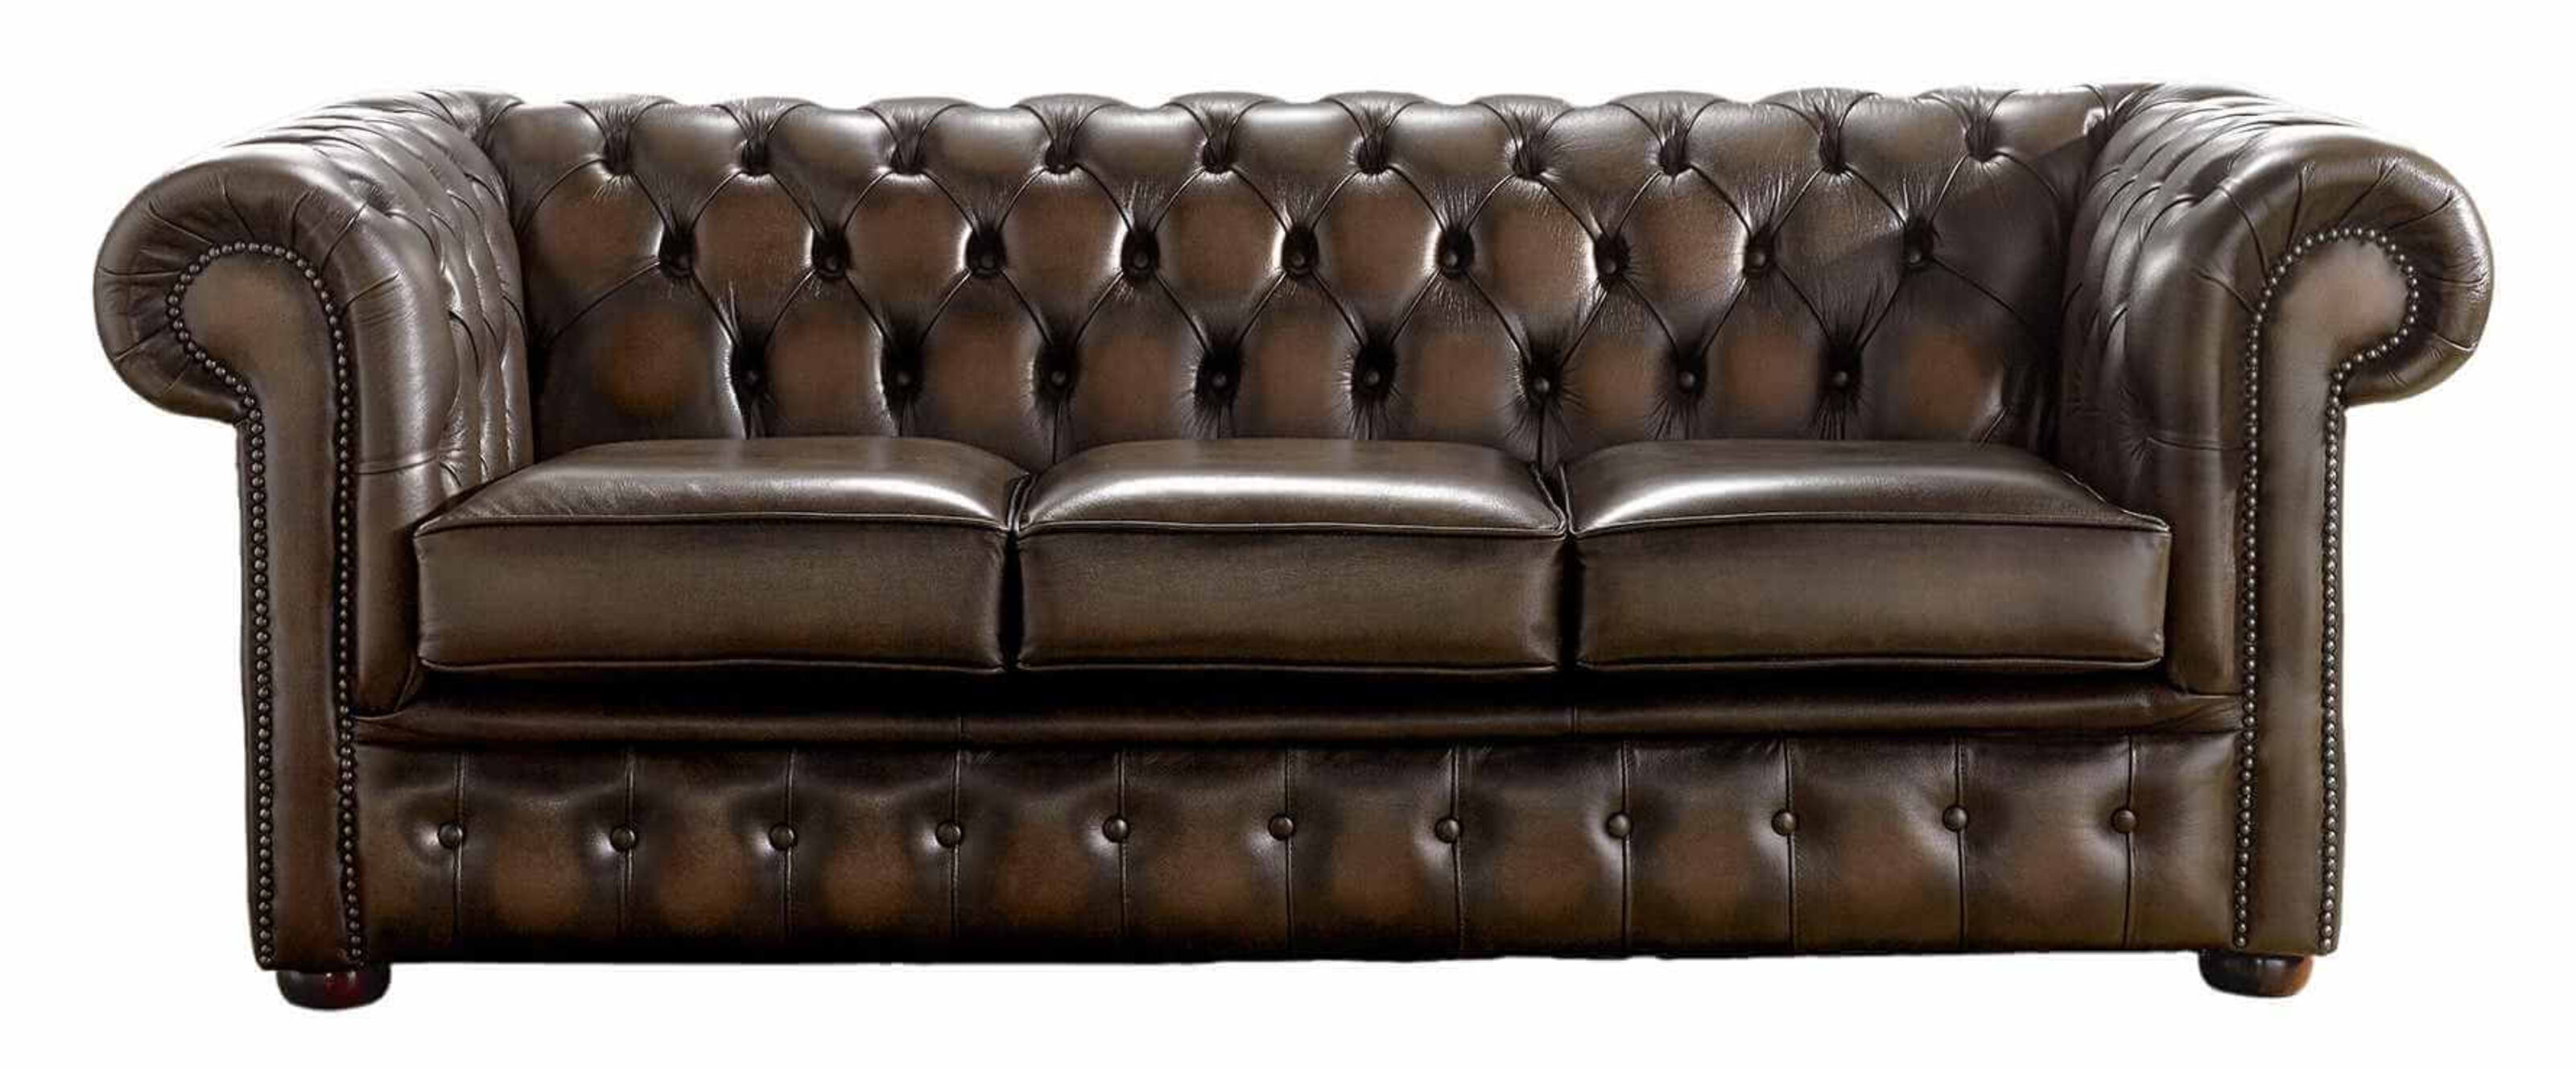 Timeless Sophistication Integrating a Chesterfield Sofa into Contemporary Living Spaces  %Post Title